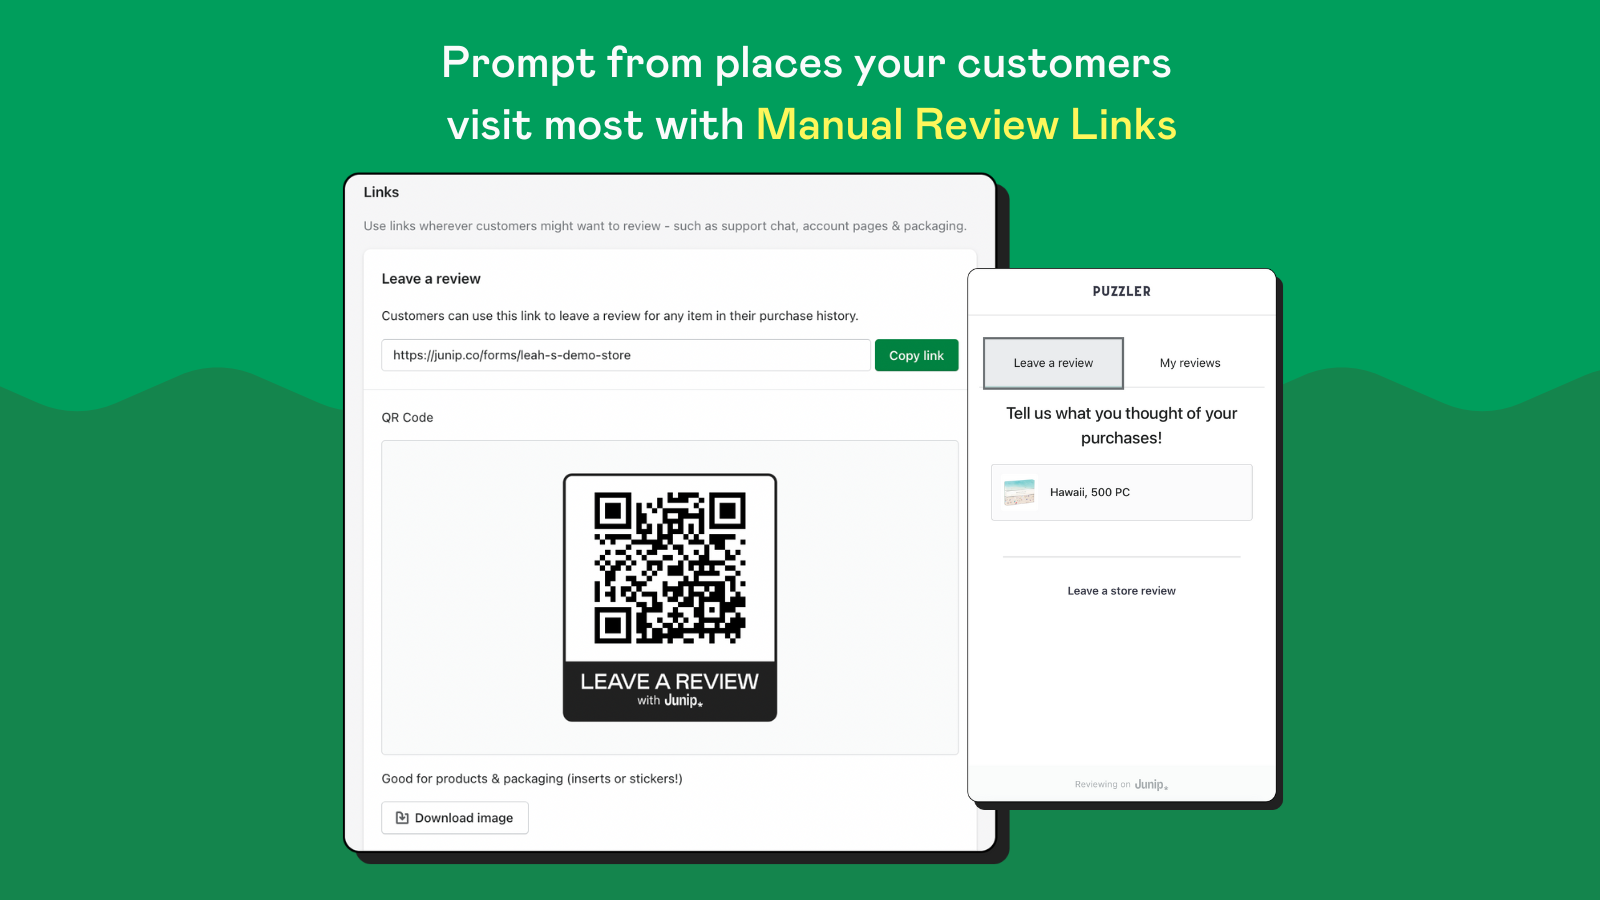 Prompt customers where they visit most with manual review links